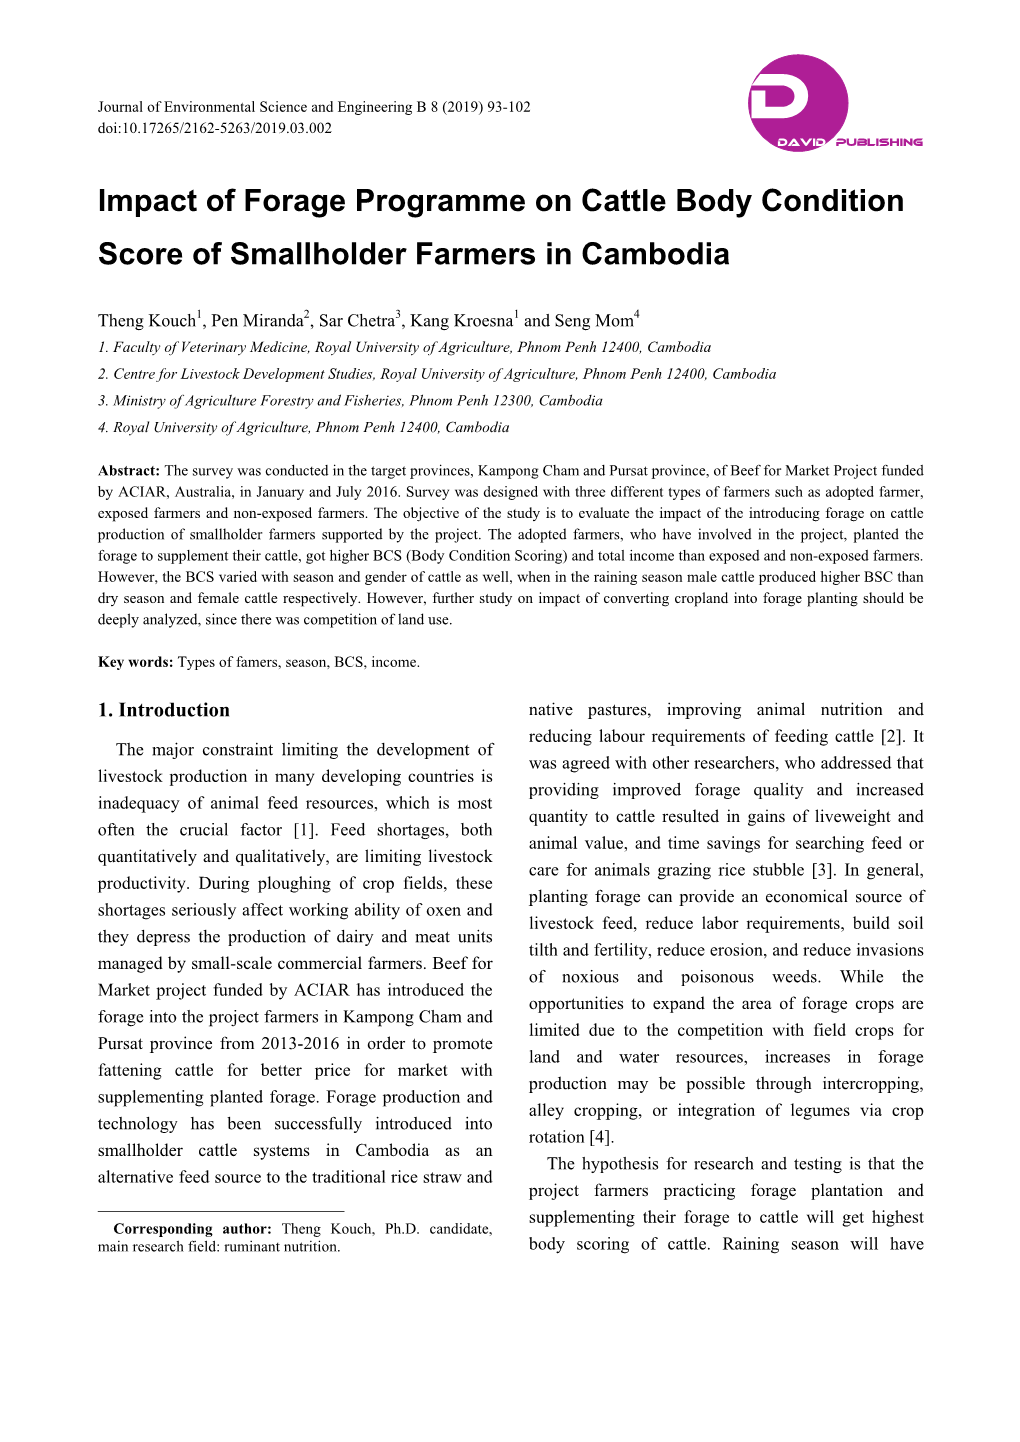 Impact of Forage Programme on Cattle Body Condition Score of Smallholder Farmers in Cambodia